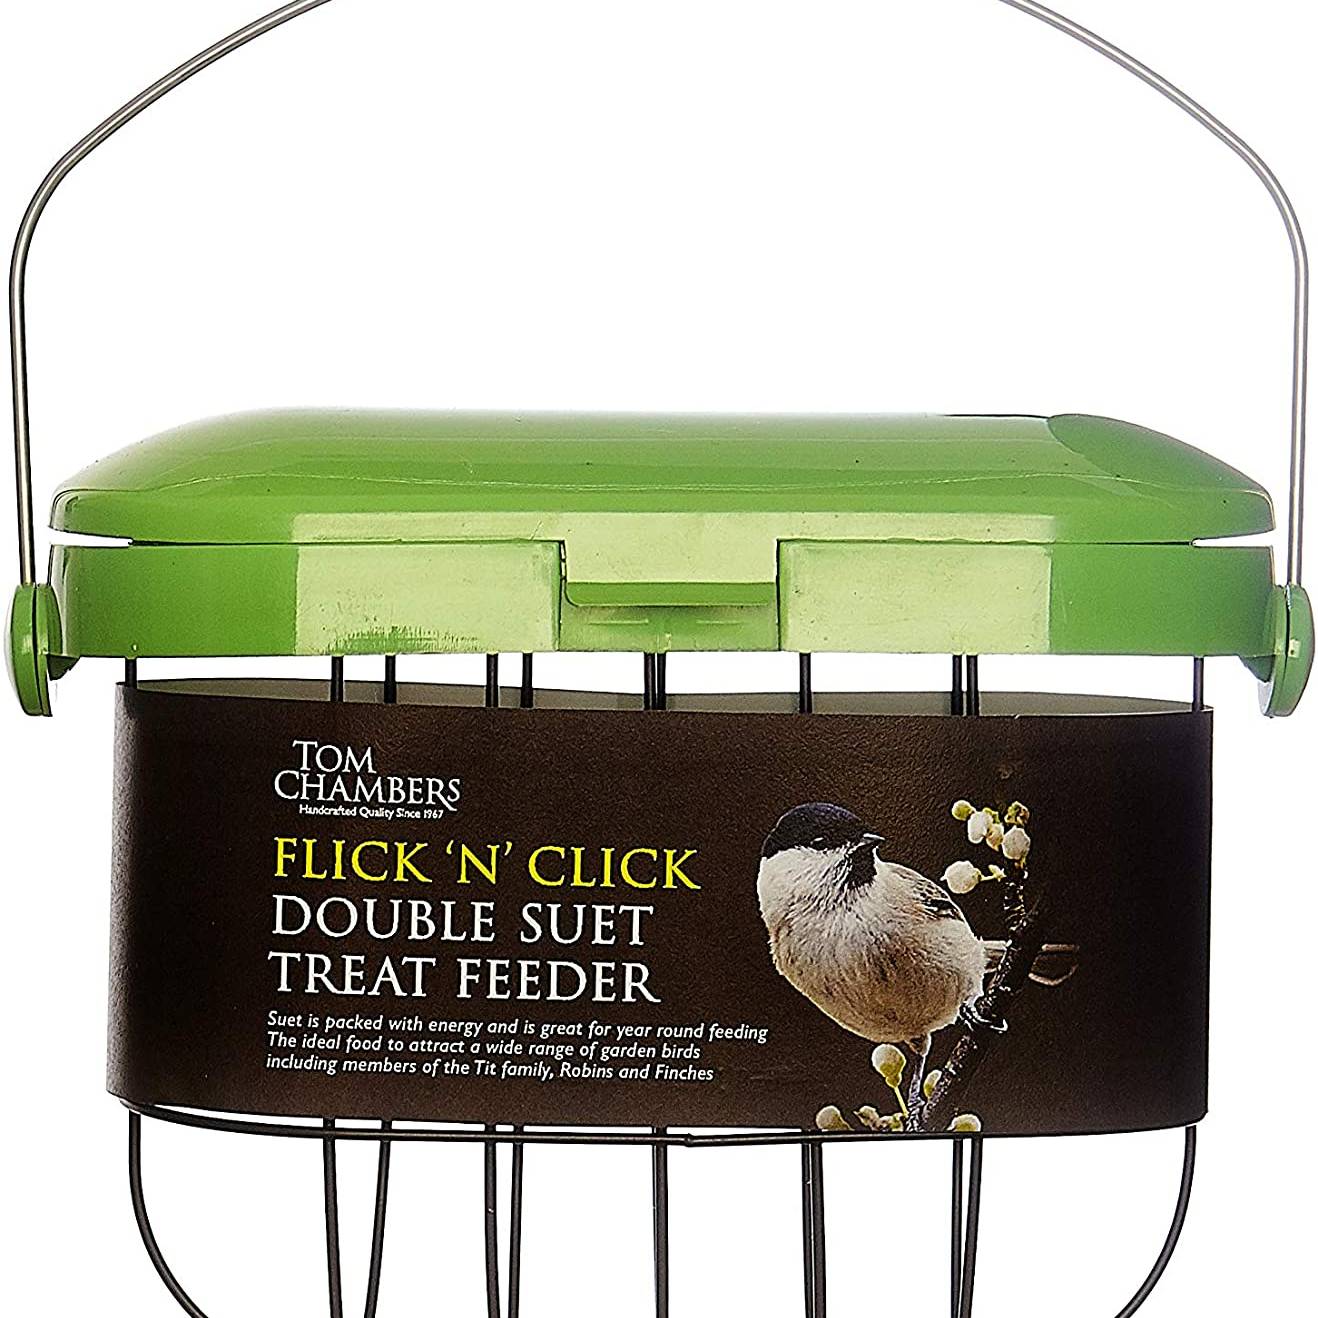 Tom Chambers Flick 'n' Click Double Suet Treat Feeder